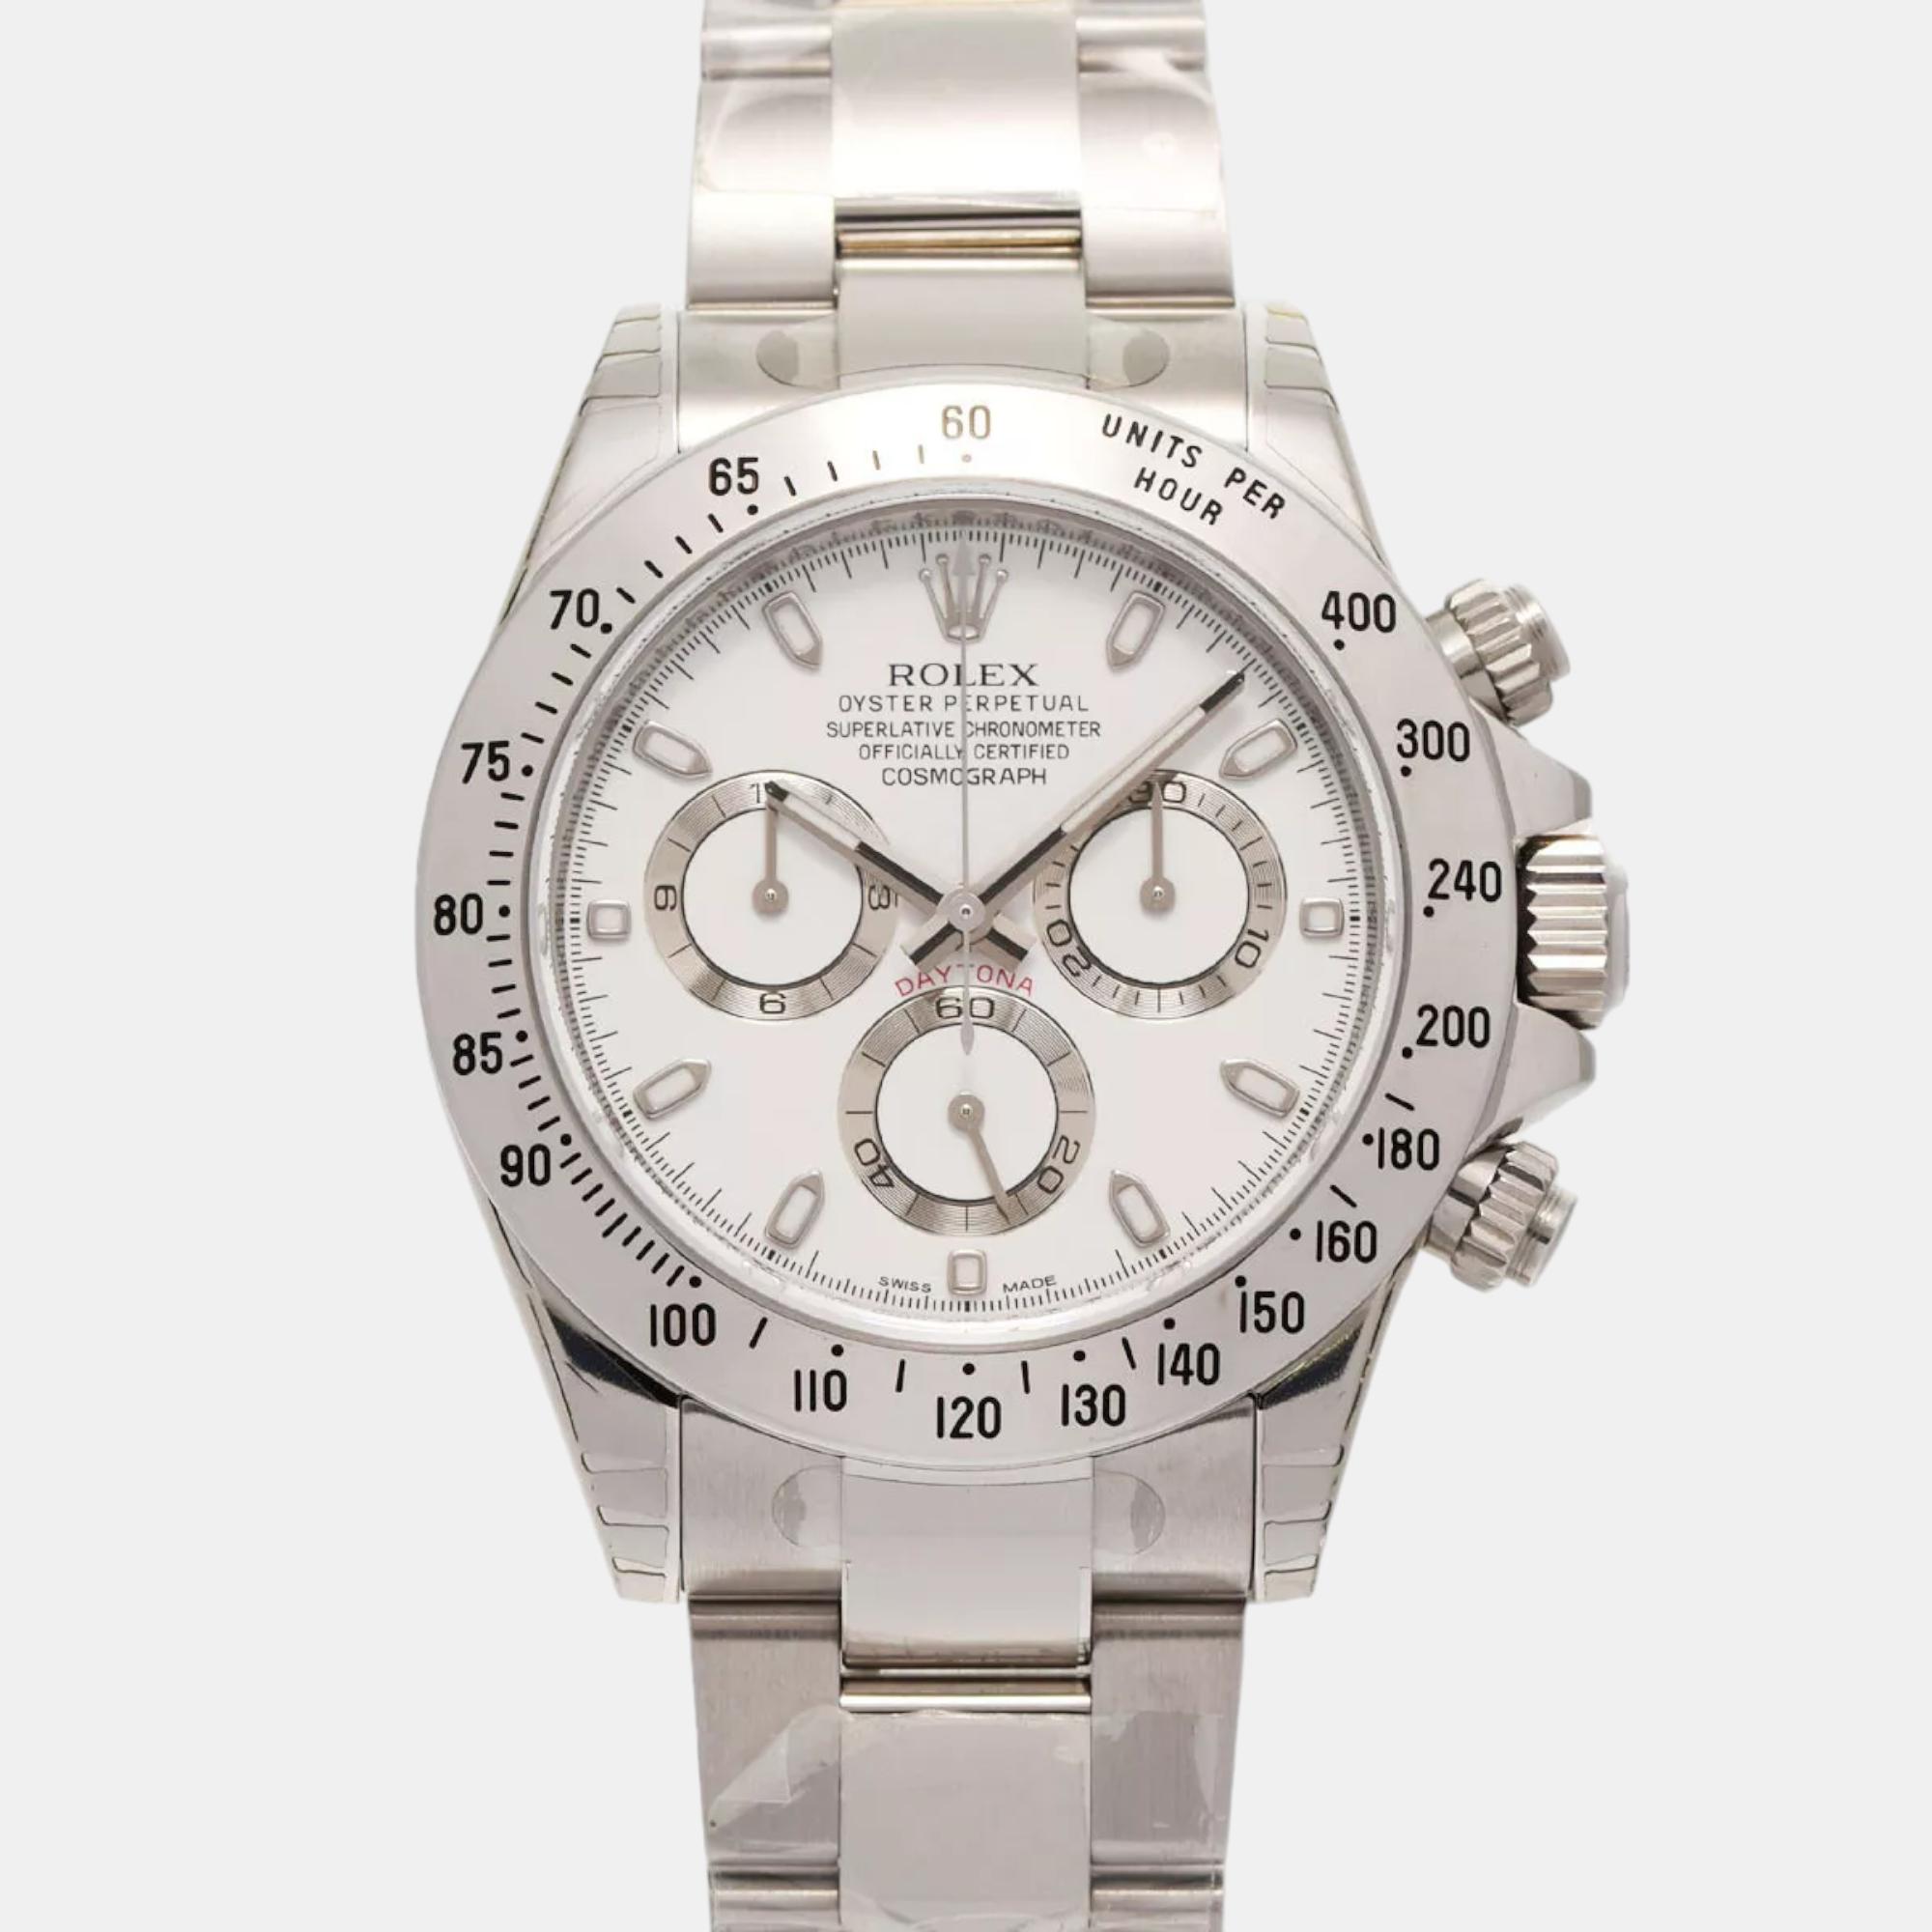 Rolex white stainless steel cosmograph daytona 116520 automatic men's wristwatch 40 mm